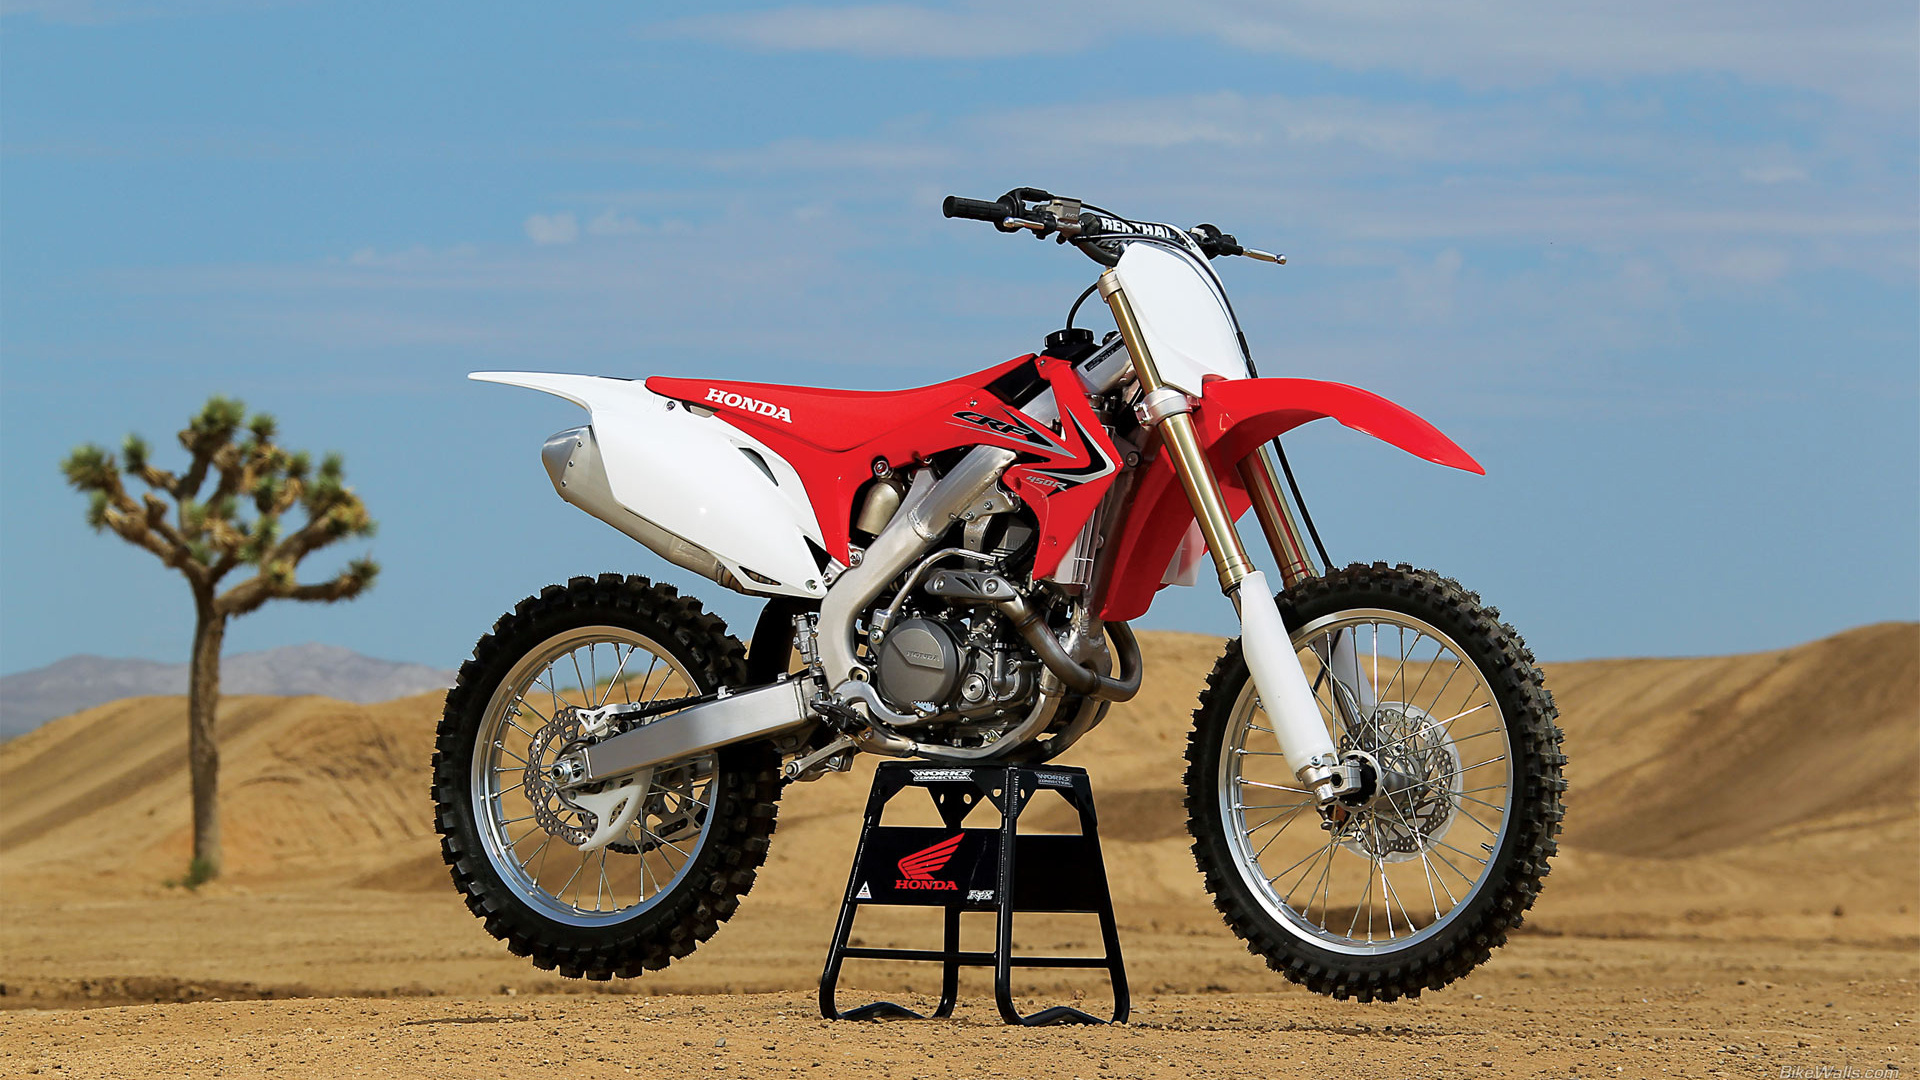 Honda CRF450R, Free download wallpapers, High-resolution pictures, 1920x1080 Full HD Desktop